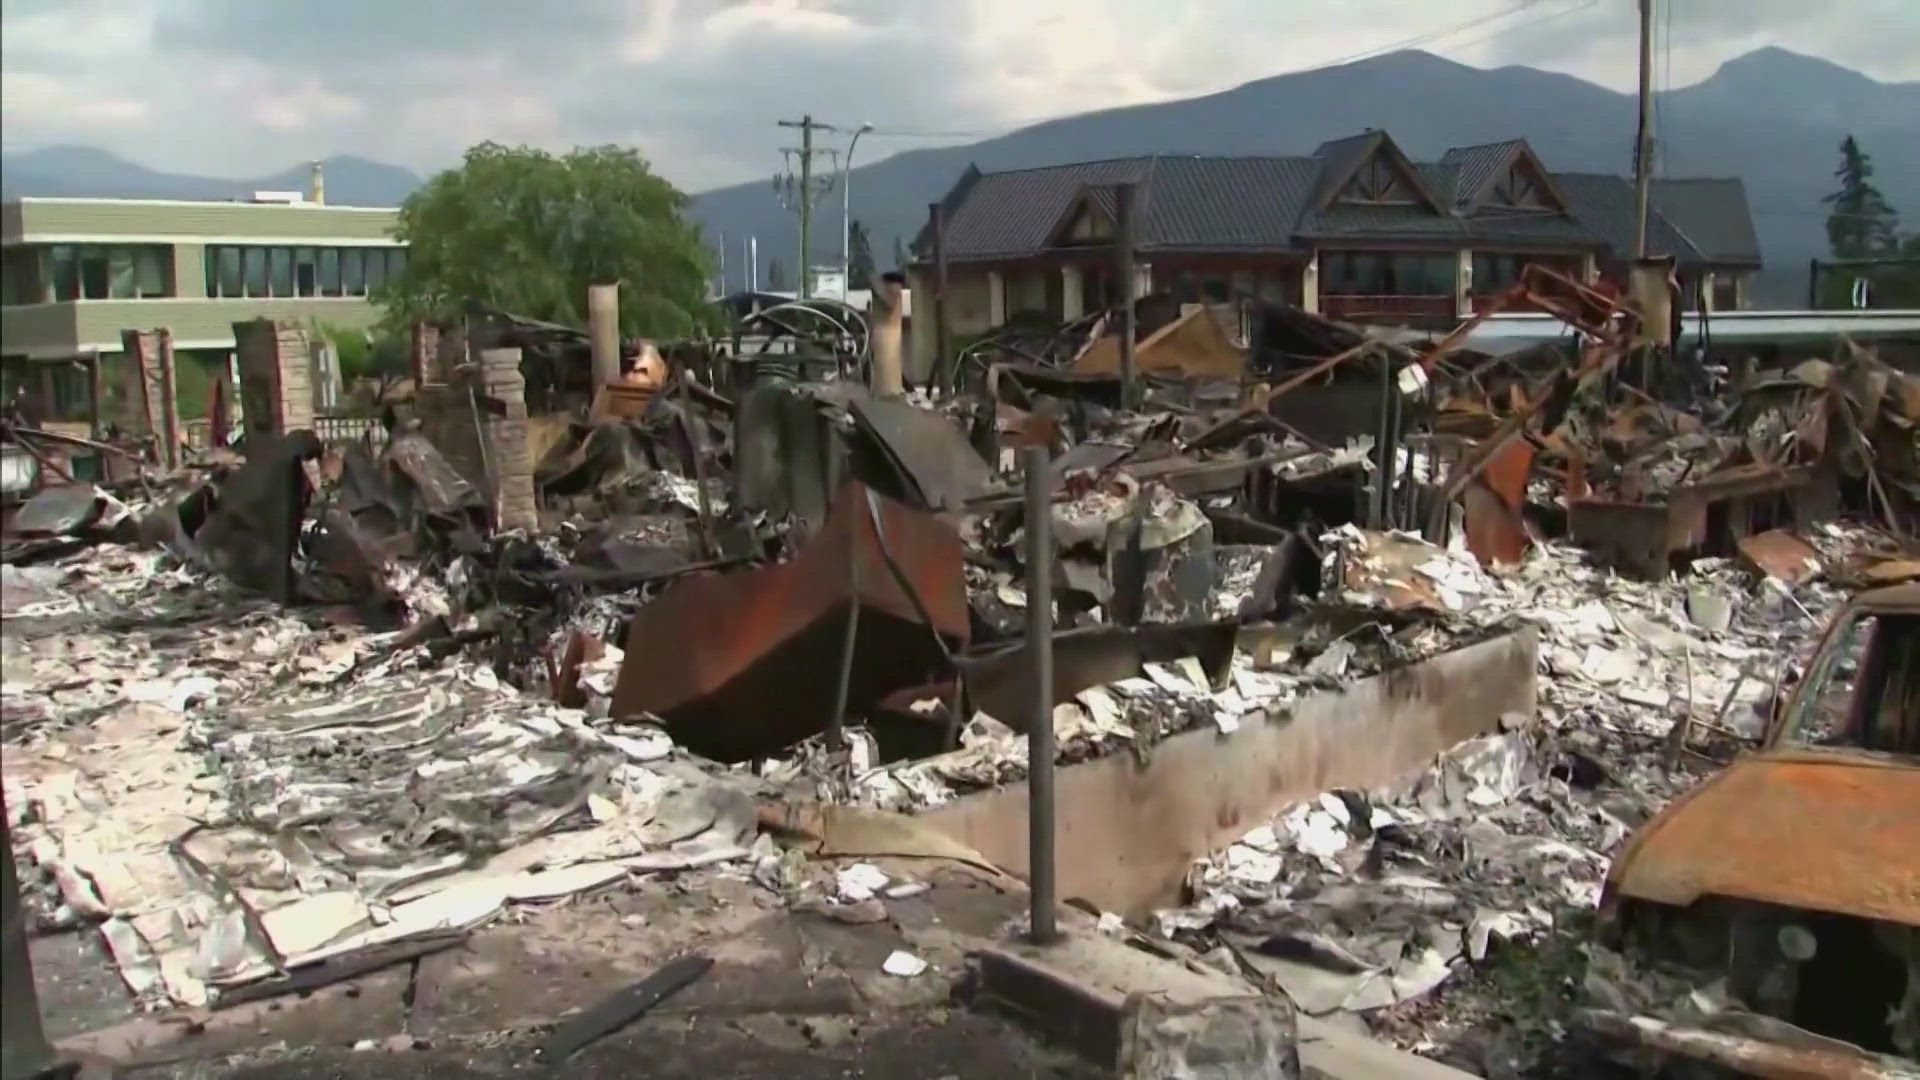 More than 350 structures have been destroyed.